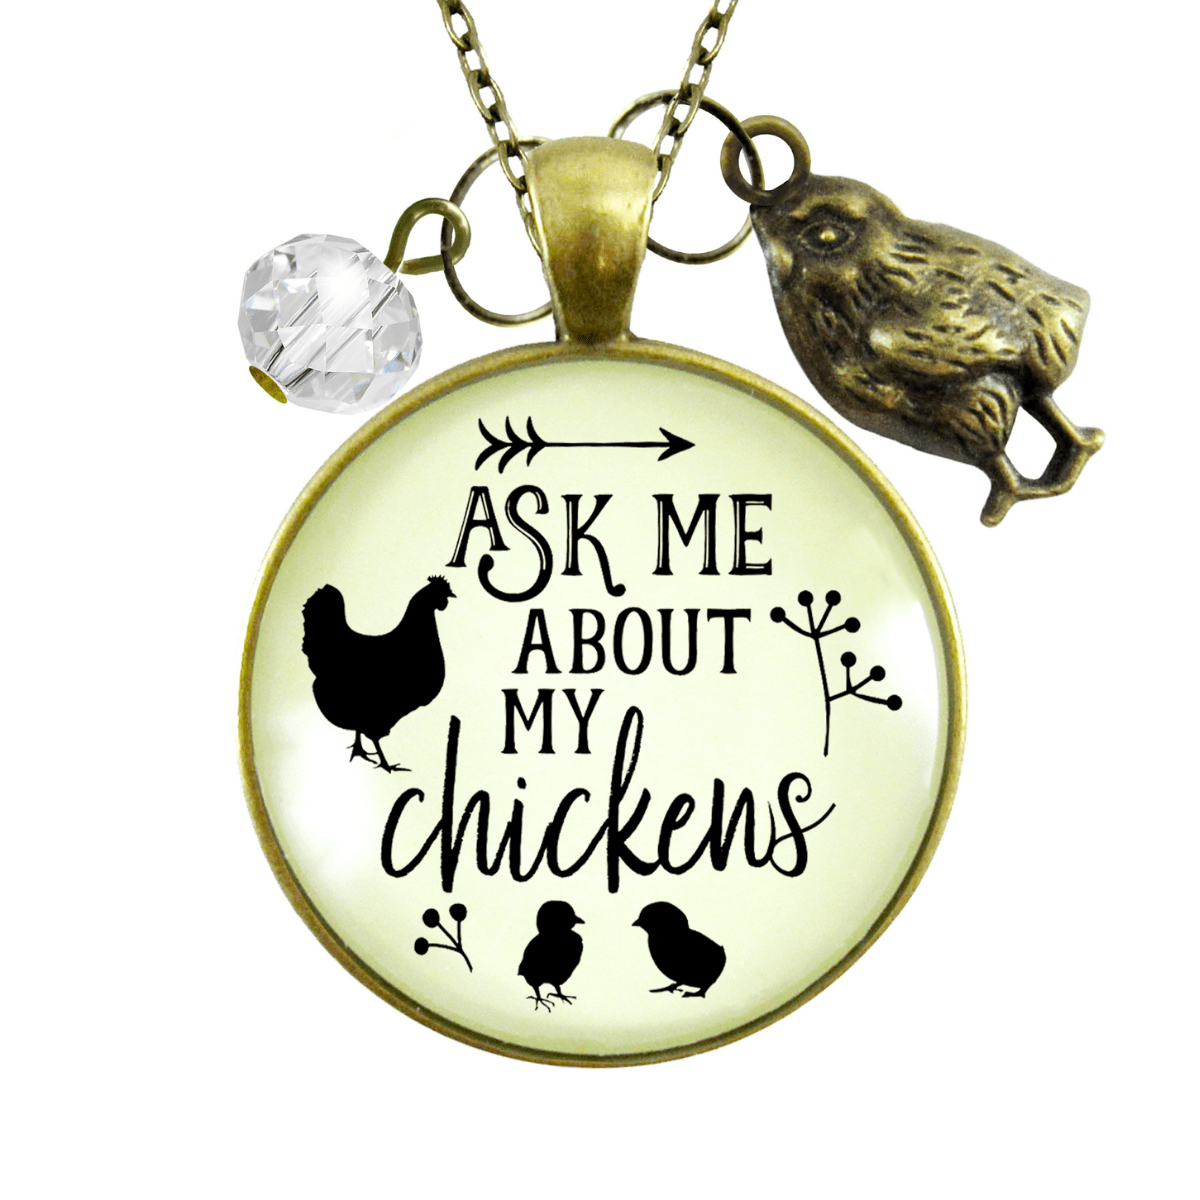 Gutsy Goodness Chicken Mom Necklace Ask Me About My Chickens Novelty Gift Farm Life Inspired - Gutsy Goodness;Chicken Mom Necklace Ask Me About My Chickens Novelty Gift Farm Life Inspired - Gutsy Goodness Handmade Jewelry Gifts